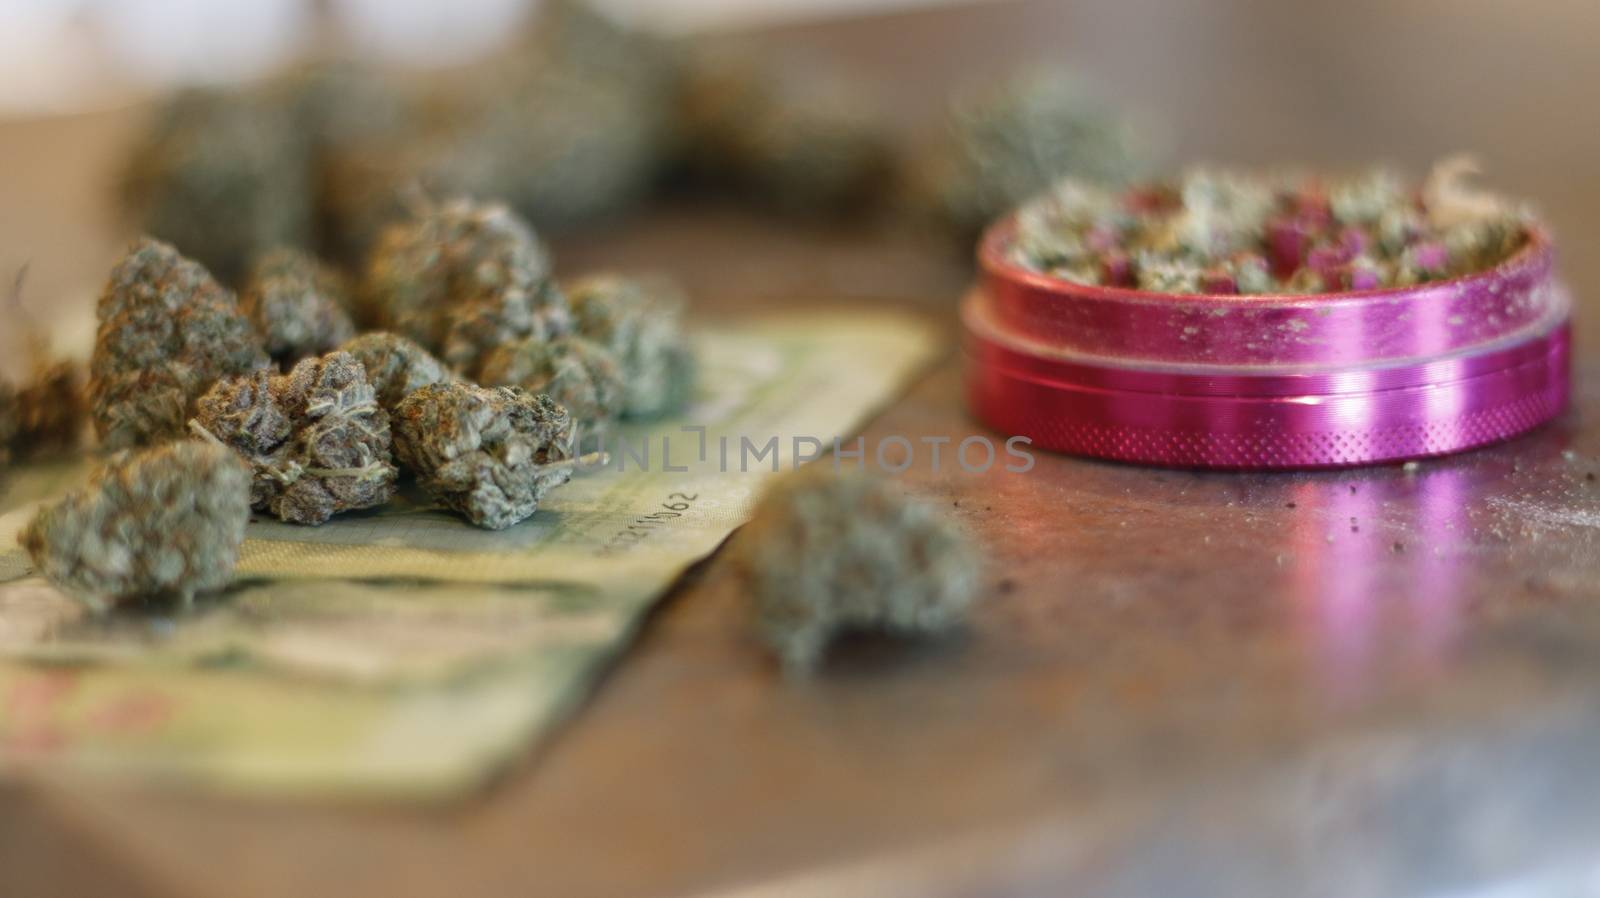 marijuana table top photography and themed. legal in canada